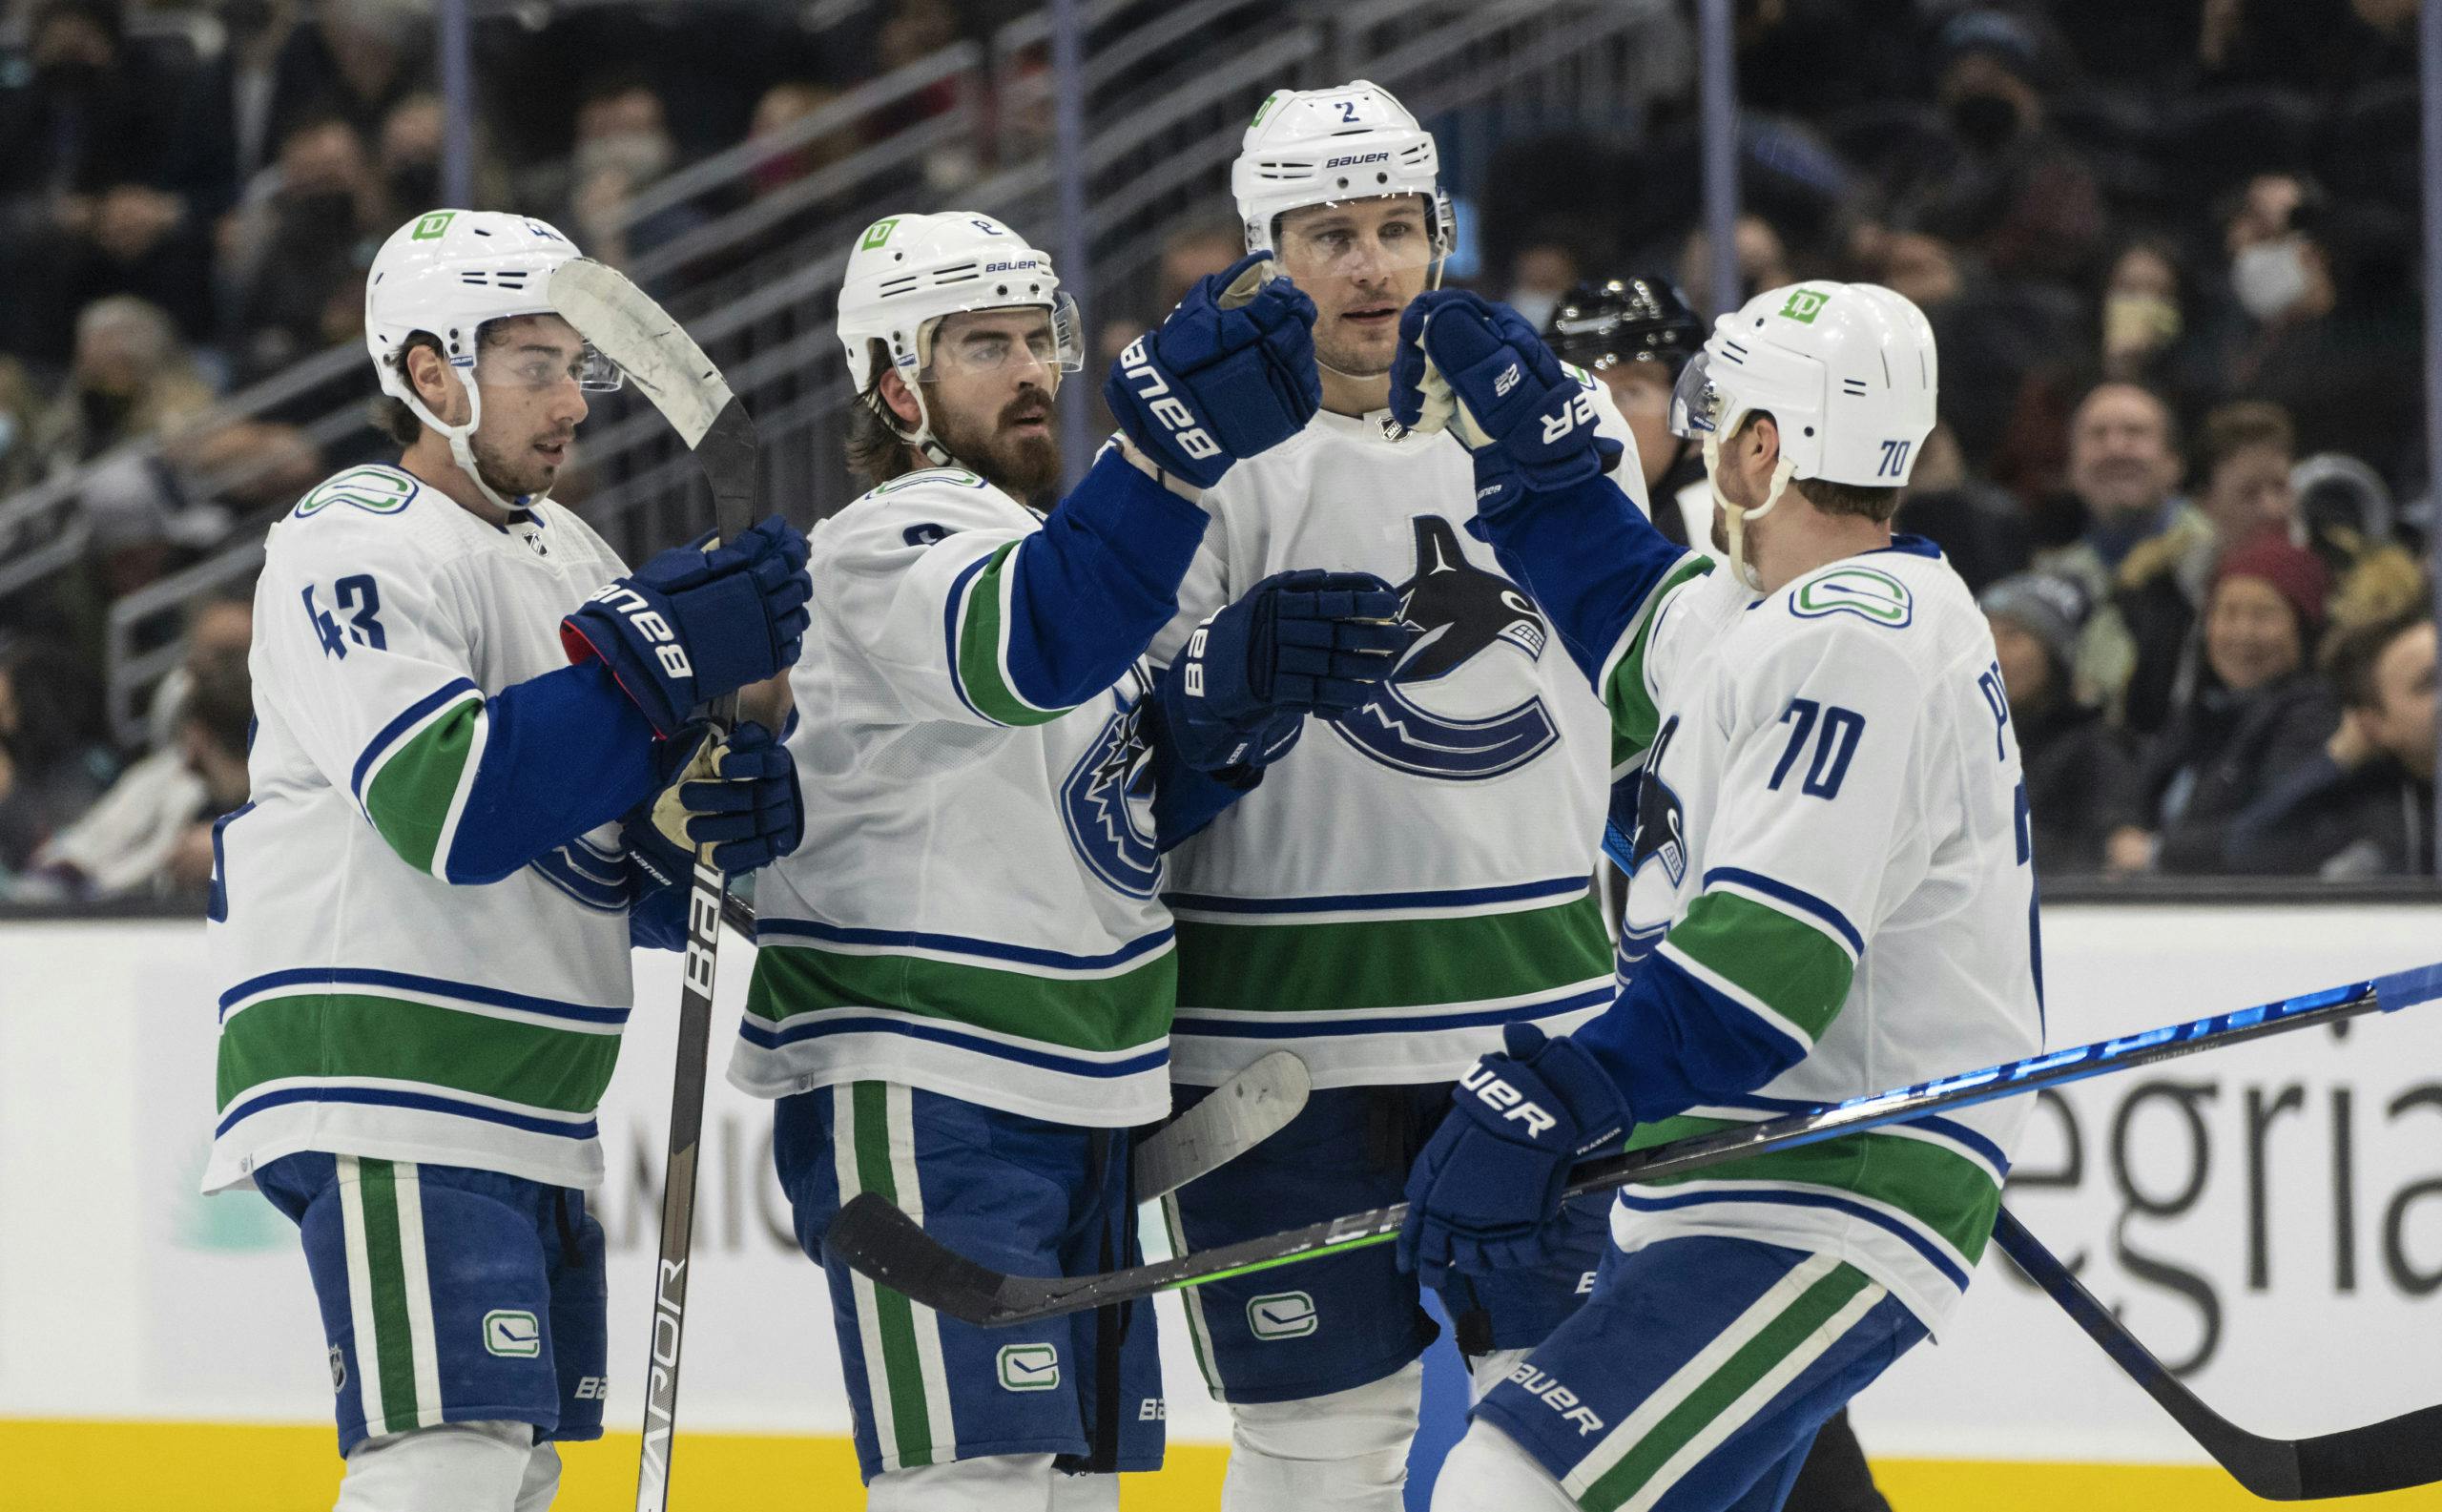 Which players who have played for both Canucks and New Jersey